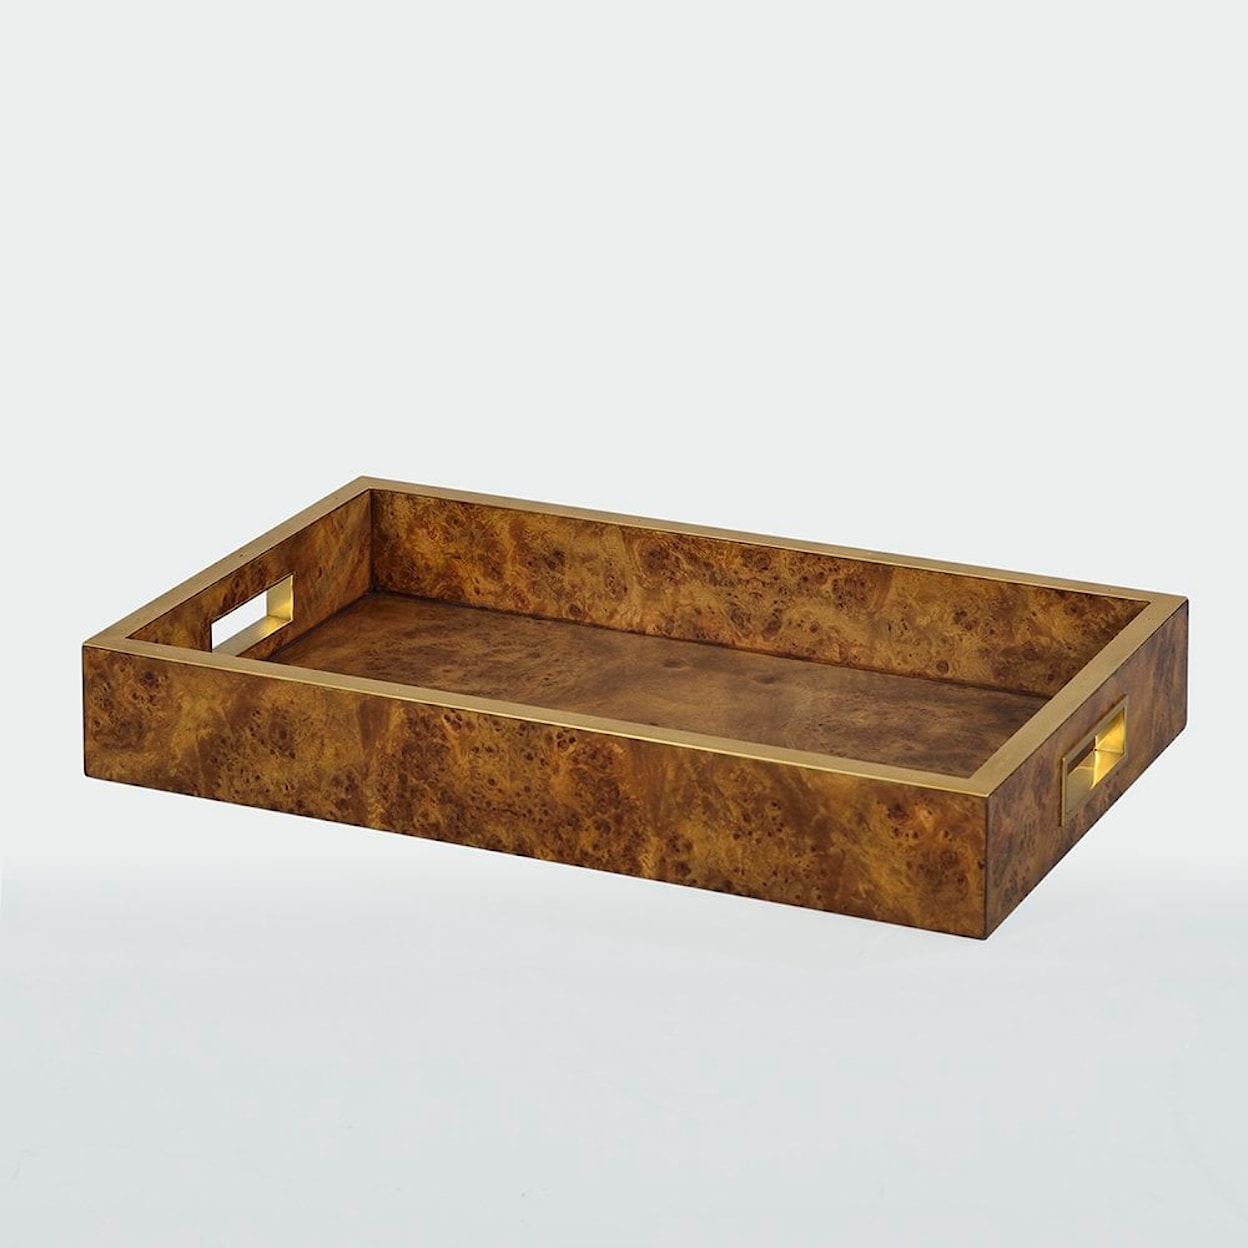 Oliver Home Furnishings Trays TRAY- RUSTIC BURL